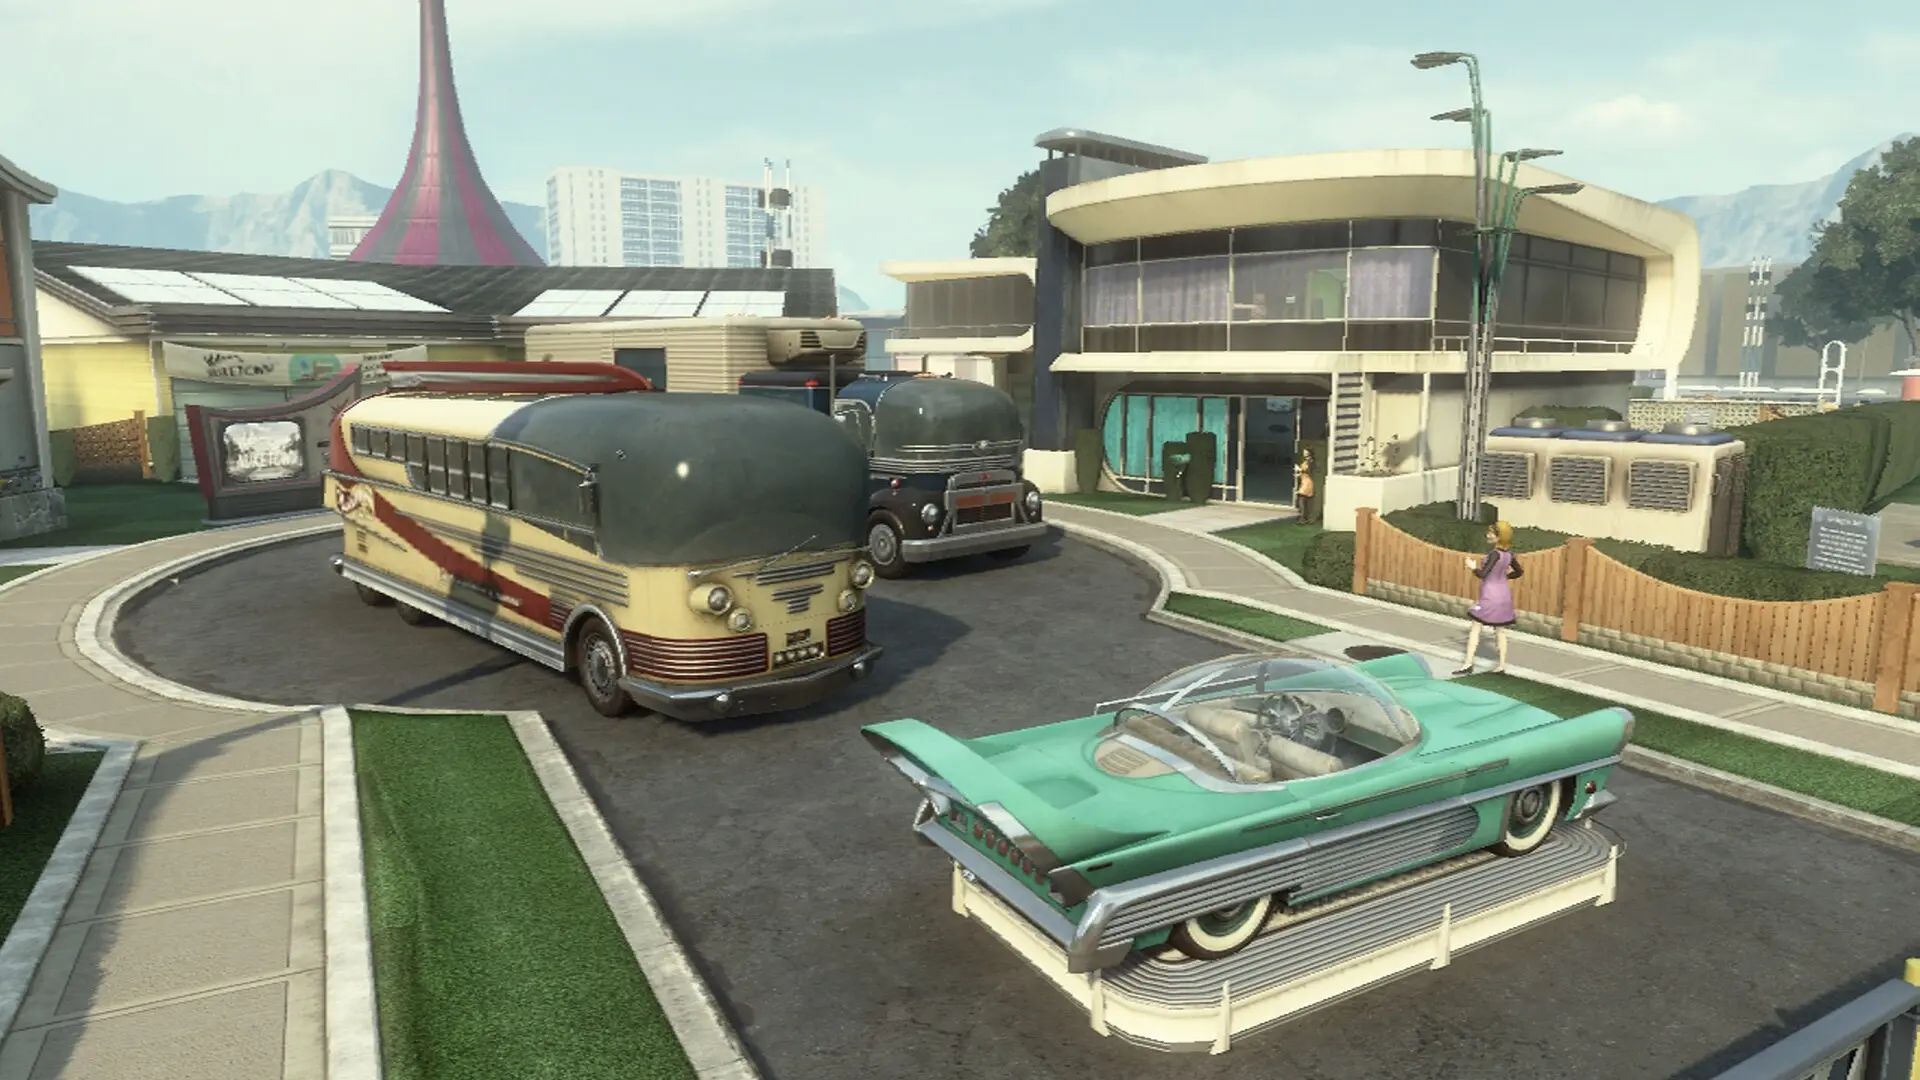 Nuketown 2025 Black Ops 2 Call of Duty Maps